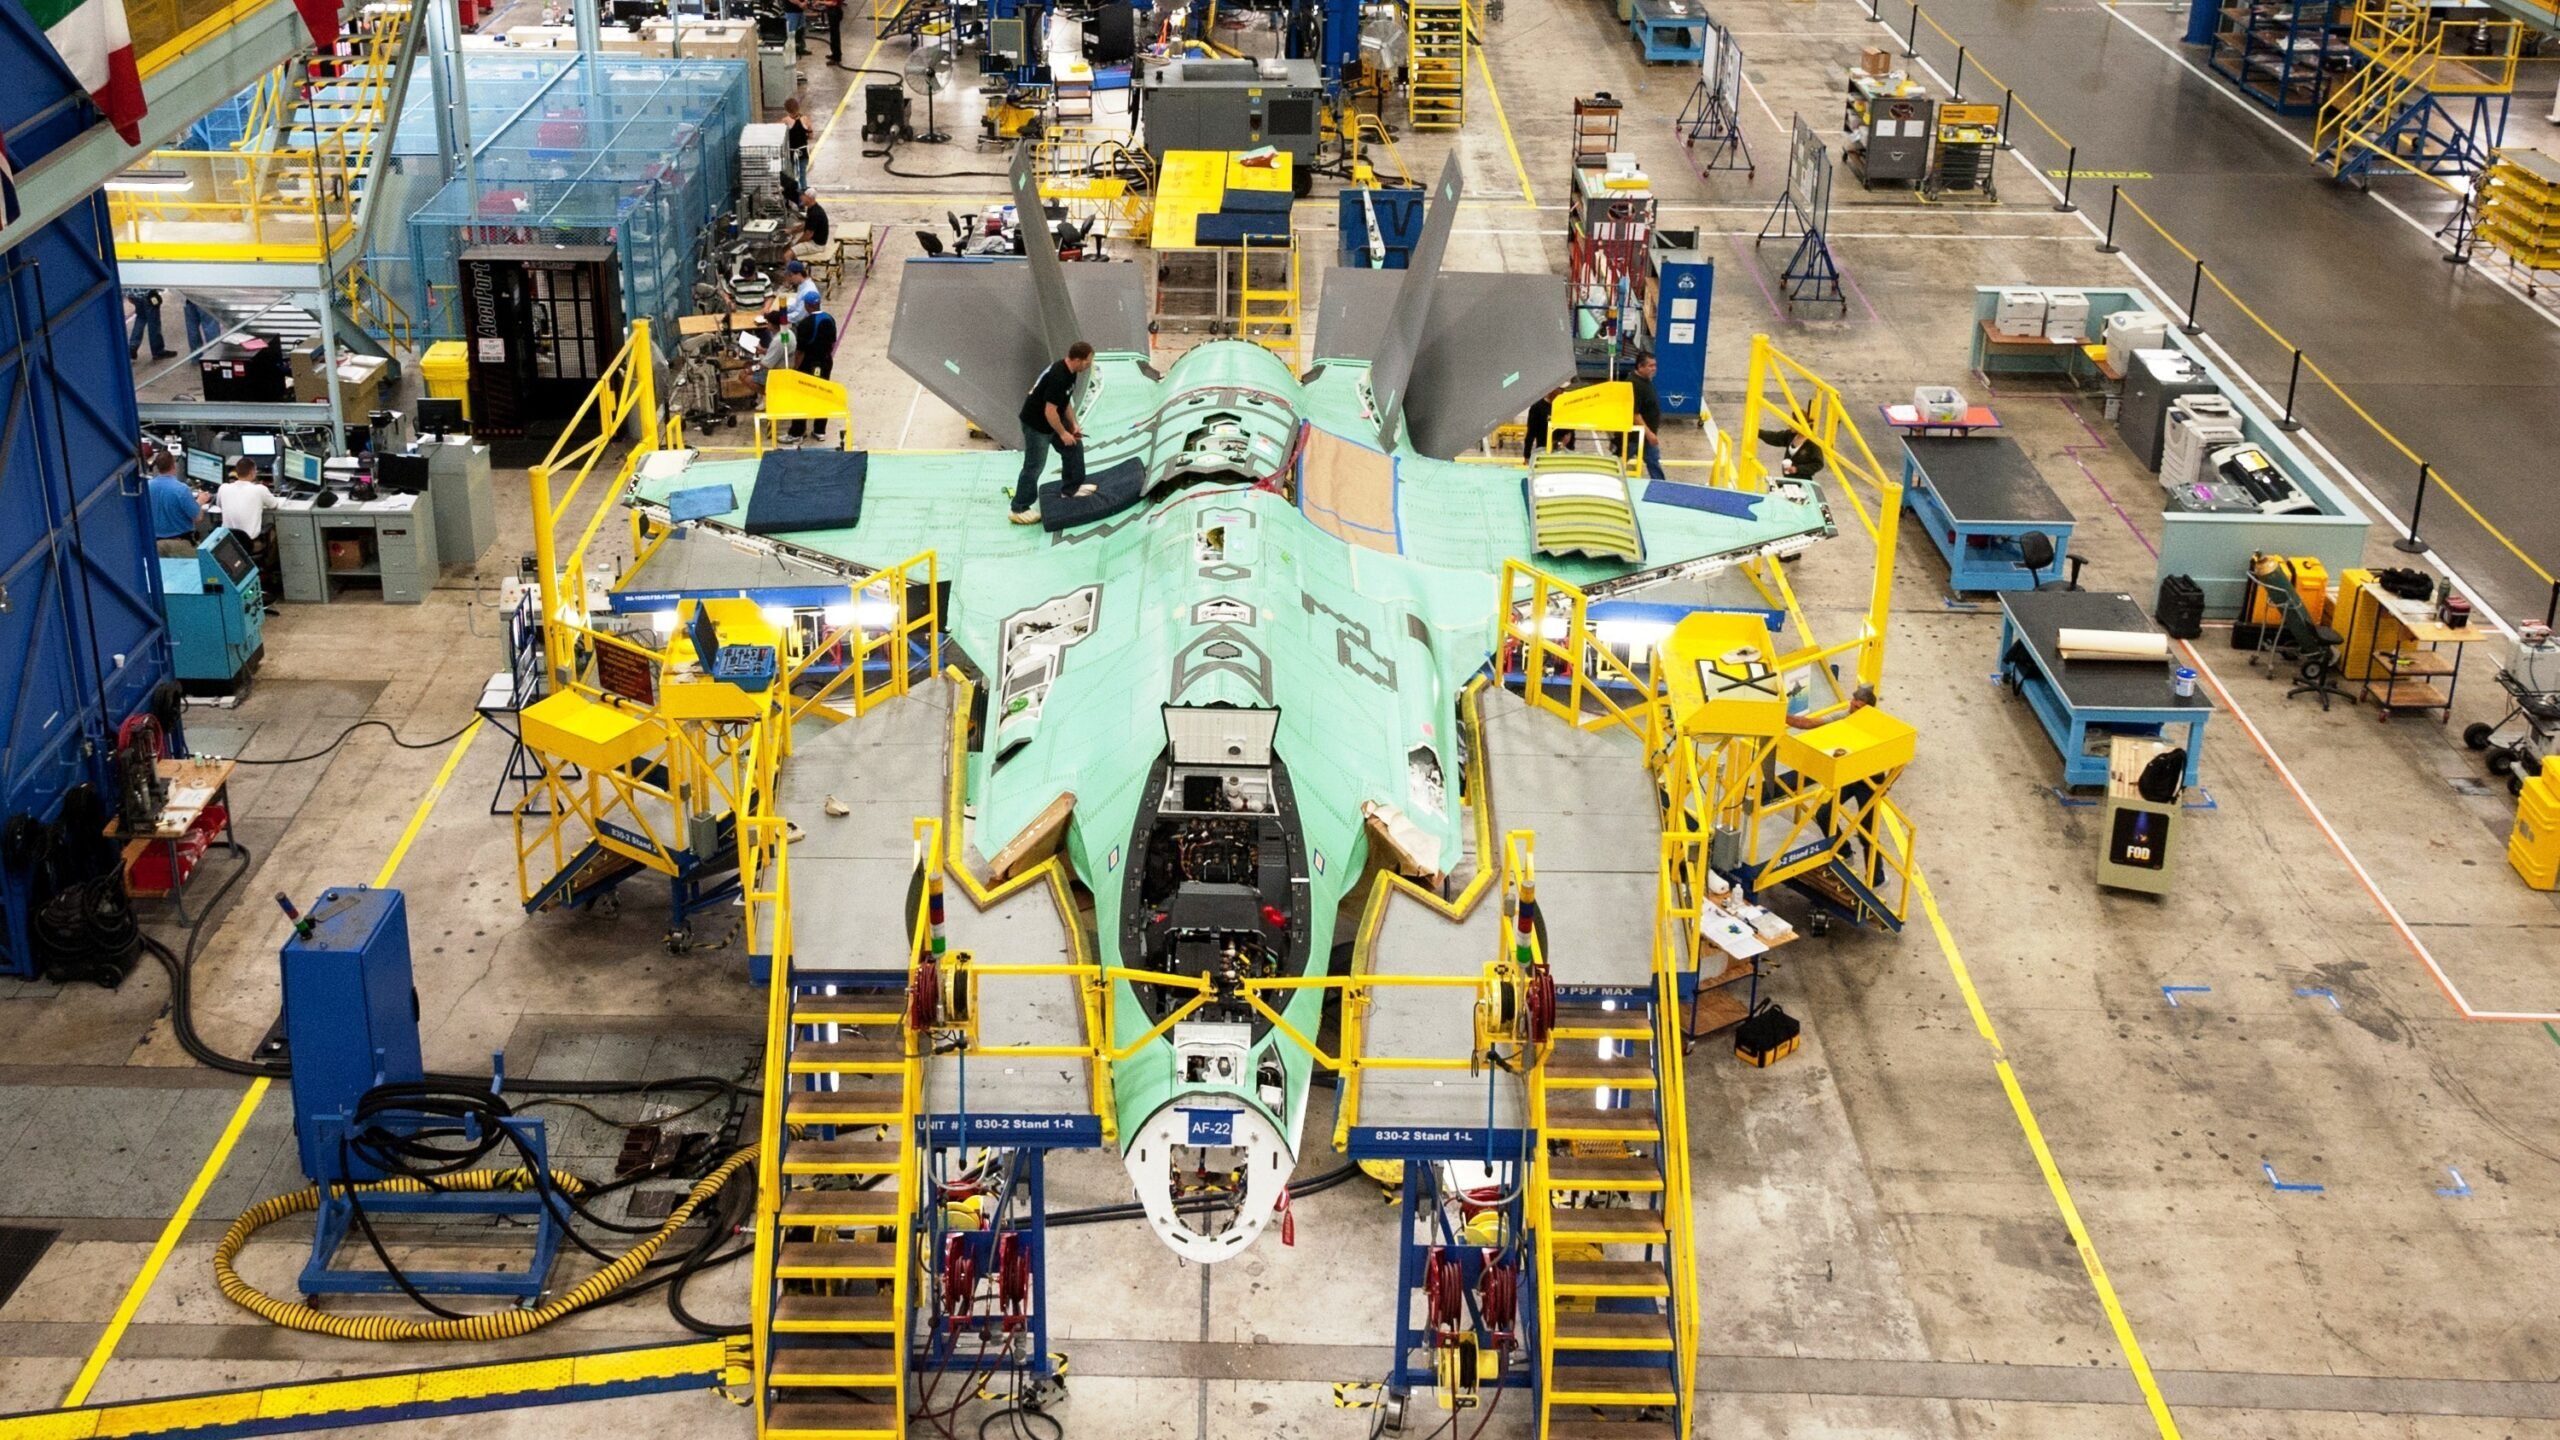 Yuma Gets a Sneak Peek at the F-35 Joint Strike Fighter